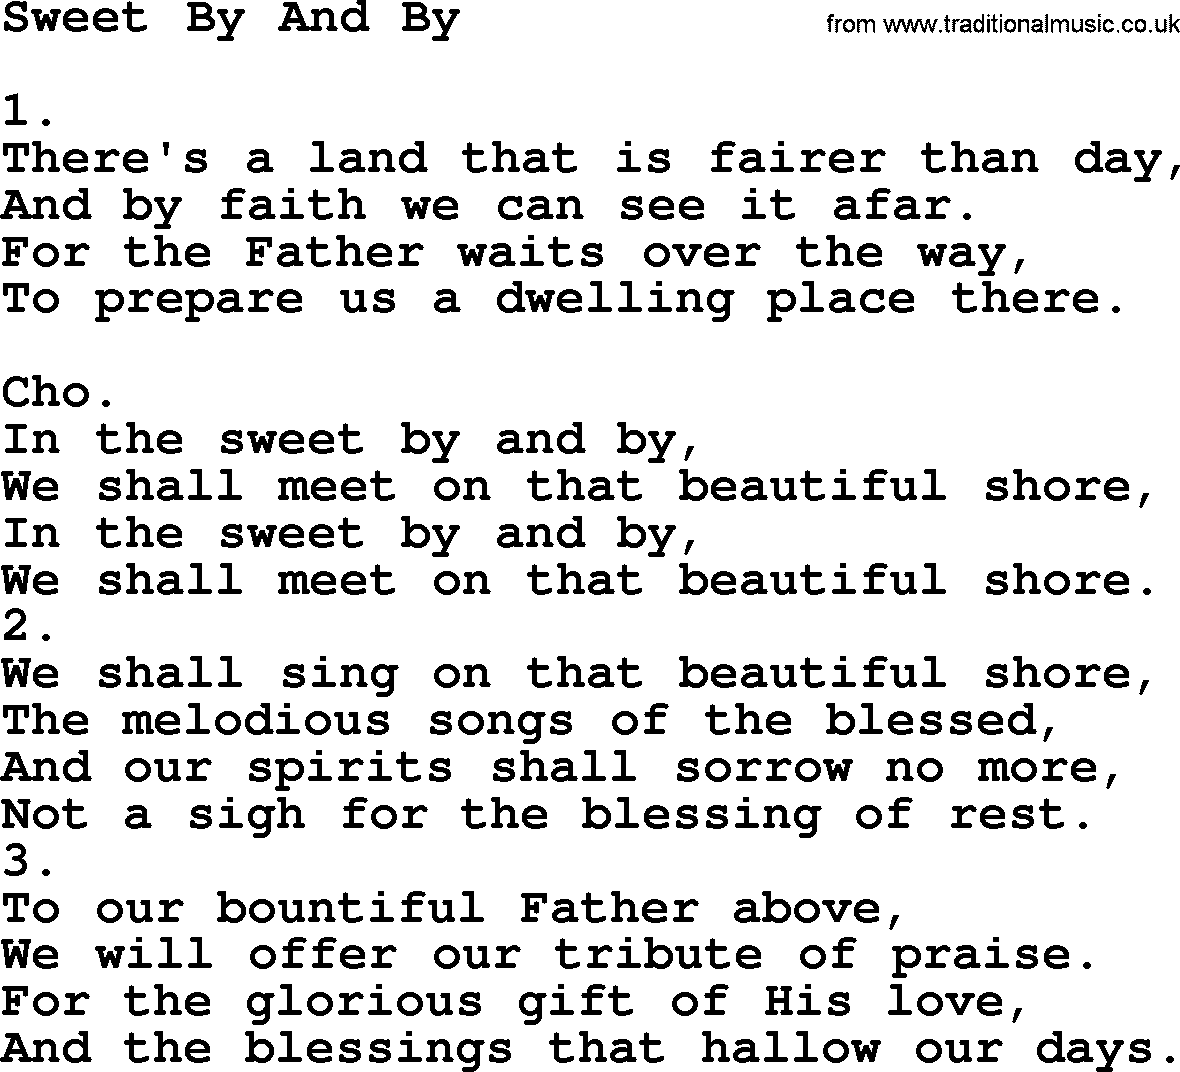 Apostolic & Pentecostal Hymns and Songs, Hymn: Sweet By And By lyrics and PDF